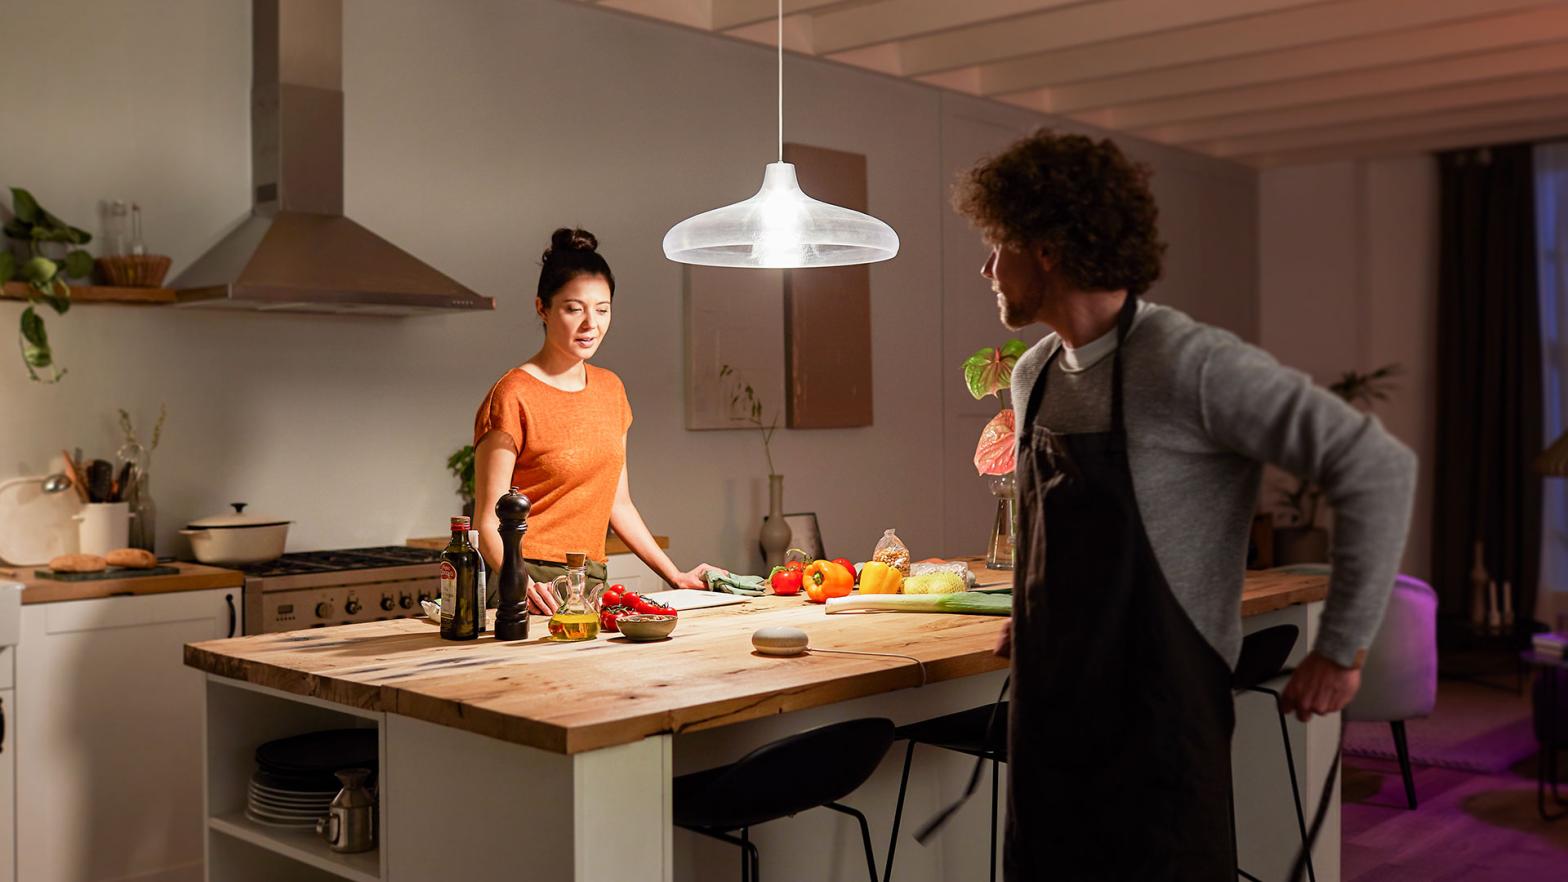 The new A21 White bulb is now the brightest Hue bulb on the market at 1600 lumens. (Photo: Philips Hue)